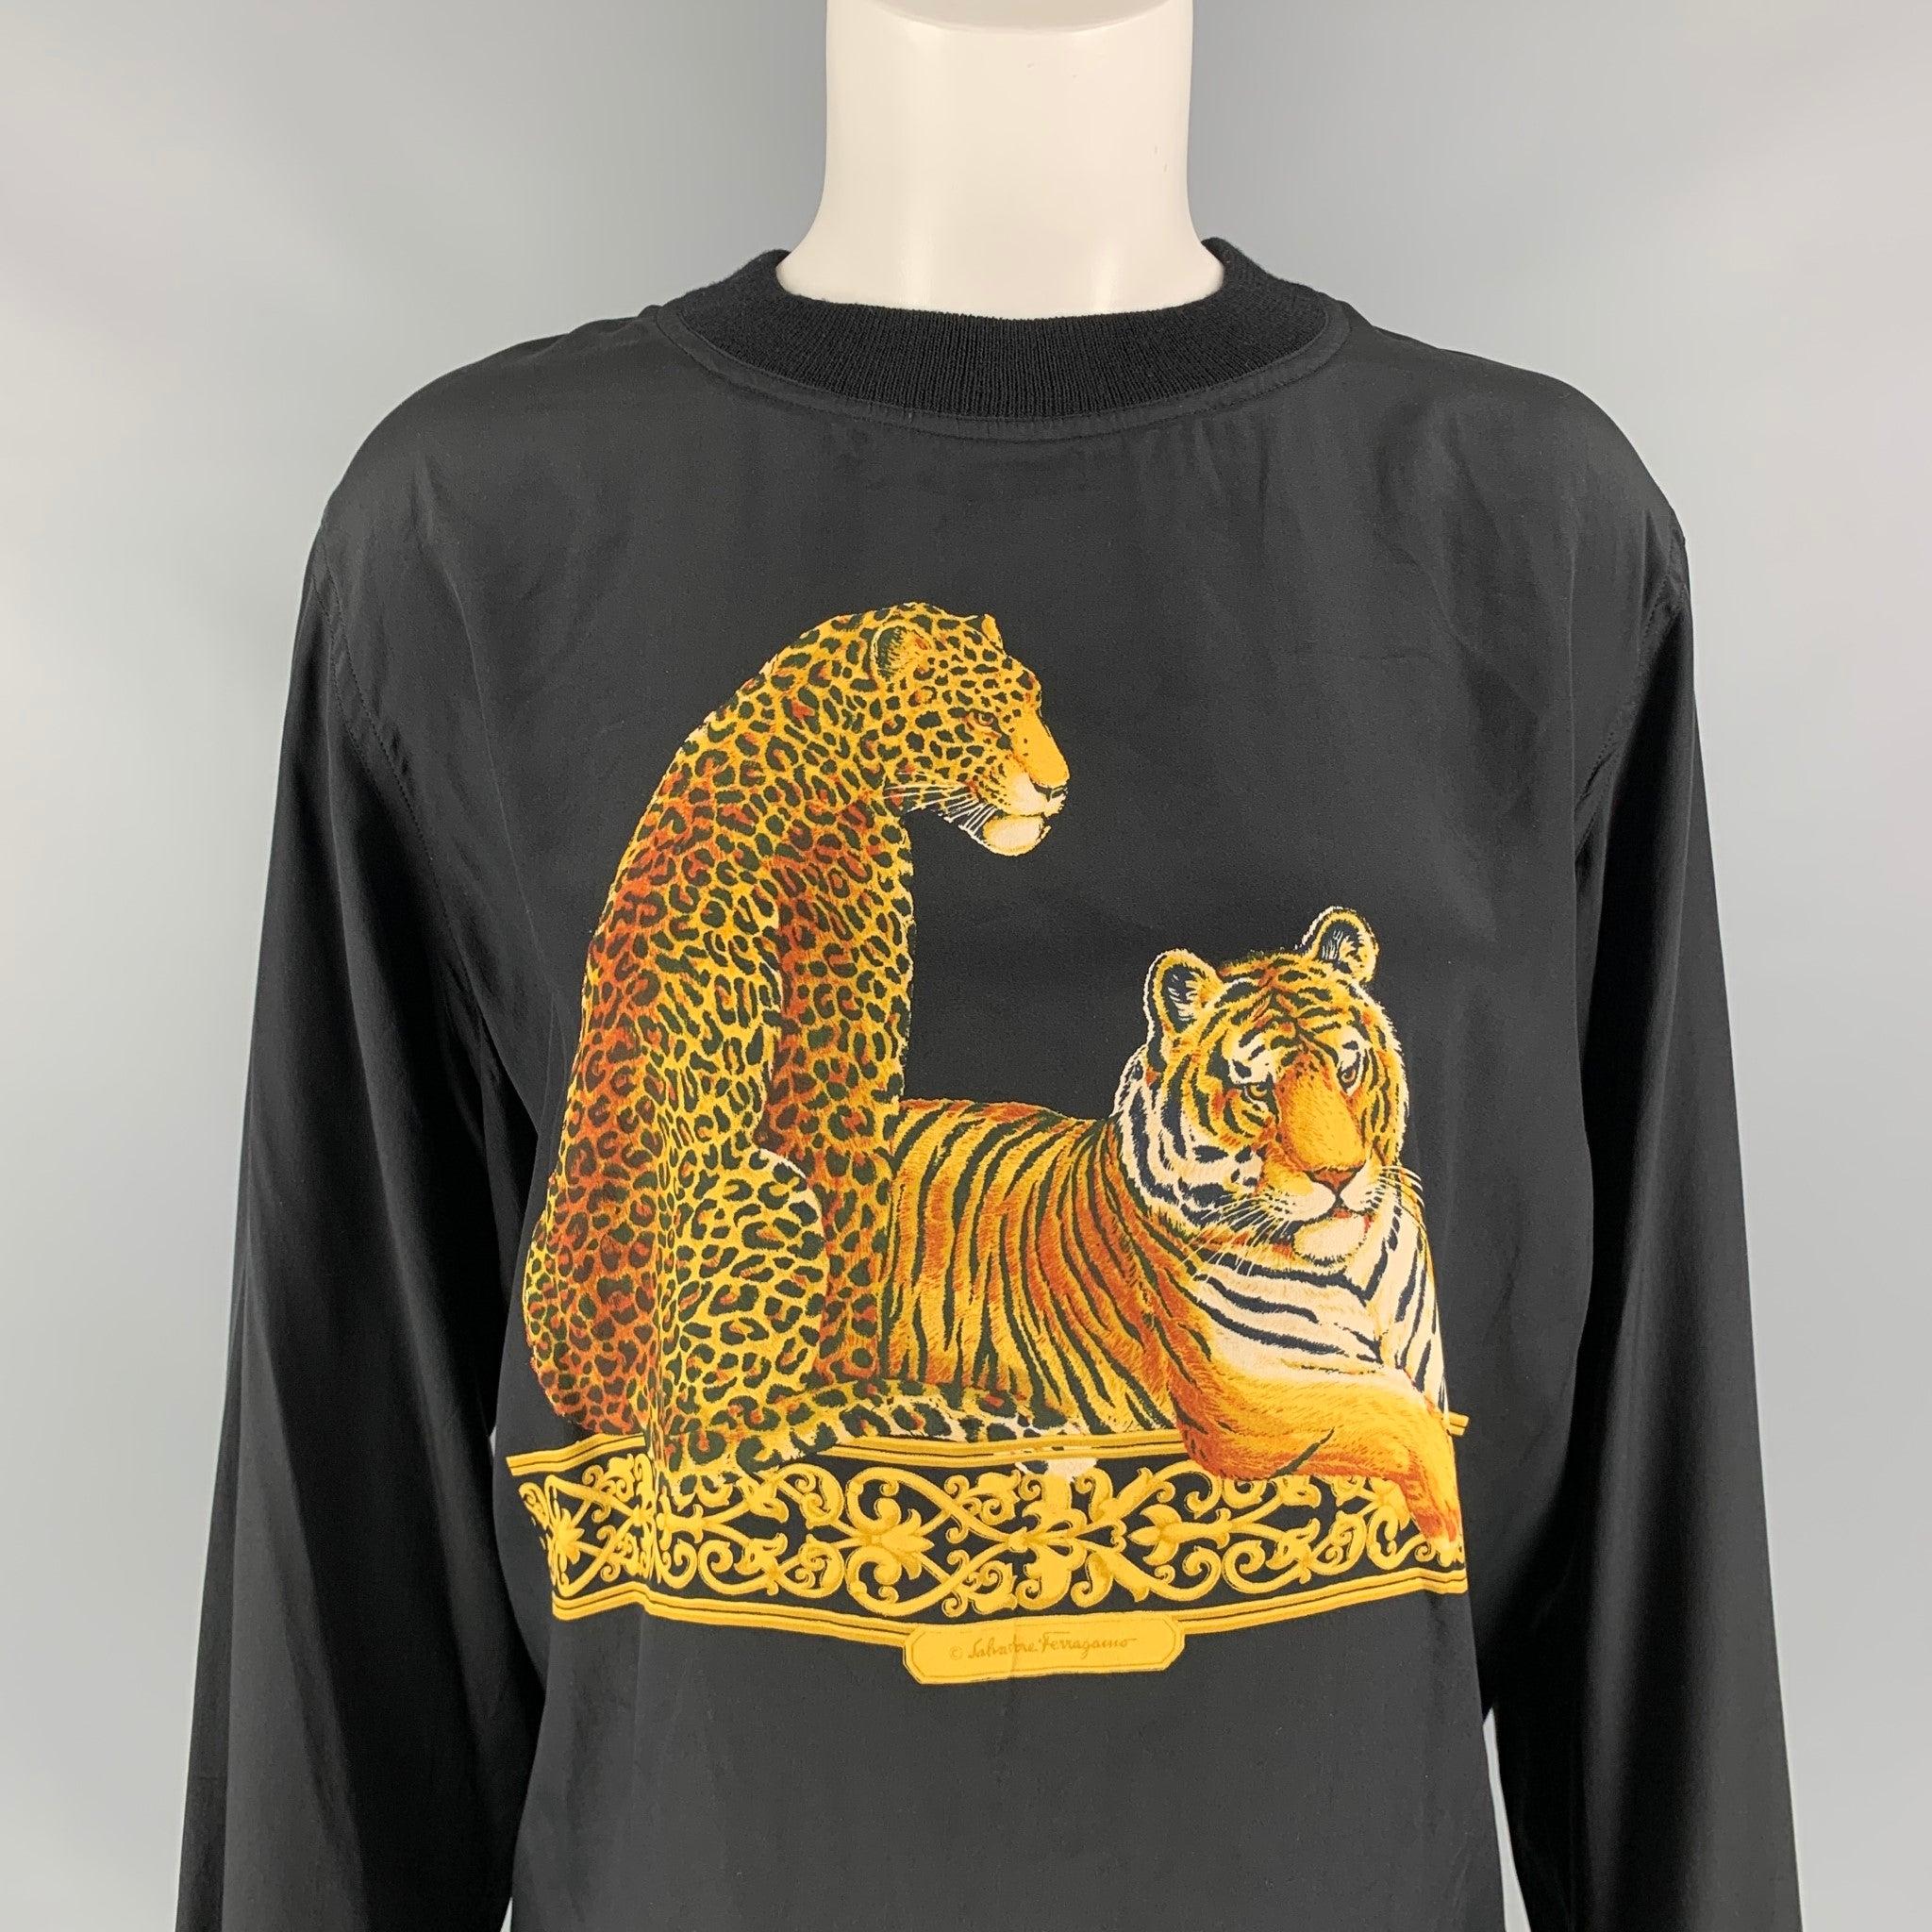 Vintage SALVATORE FERRAGAMO blouse comes in a black & beige tiger print silk featuring a ribbed hem and a crew-neck. Made in Italy.
Very Good
Pre-Owned Condition. 

Marked:   M 

Measurements: 
 
Shoulder: 17 inches  Bust:
41 inches Sleeve: 23